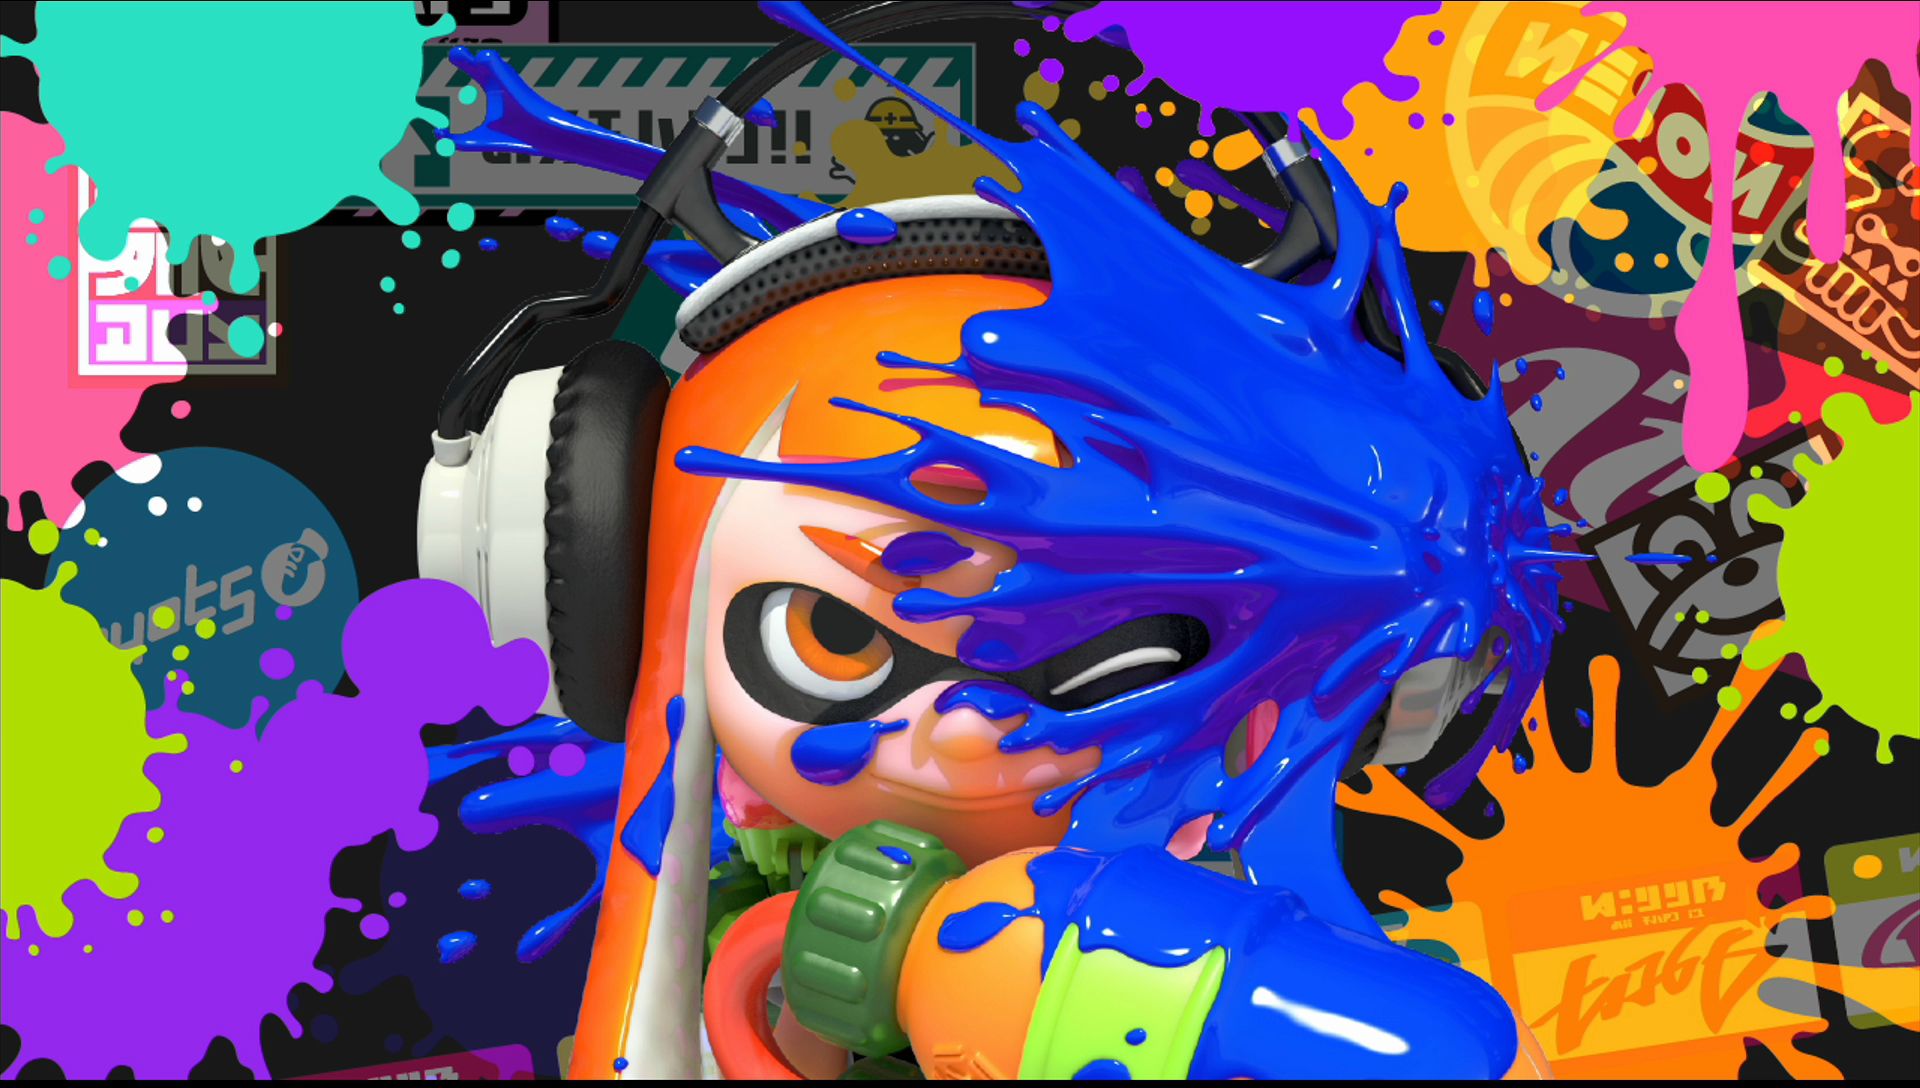 Image for Wii U sales up by 10,000 units in Japan thanks to Splatoon debut